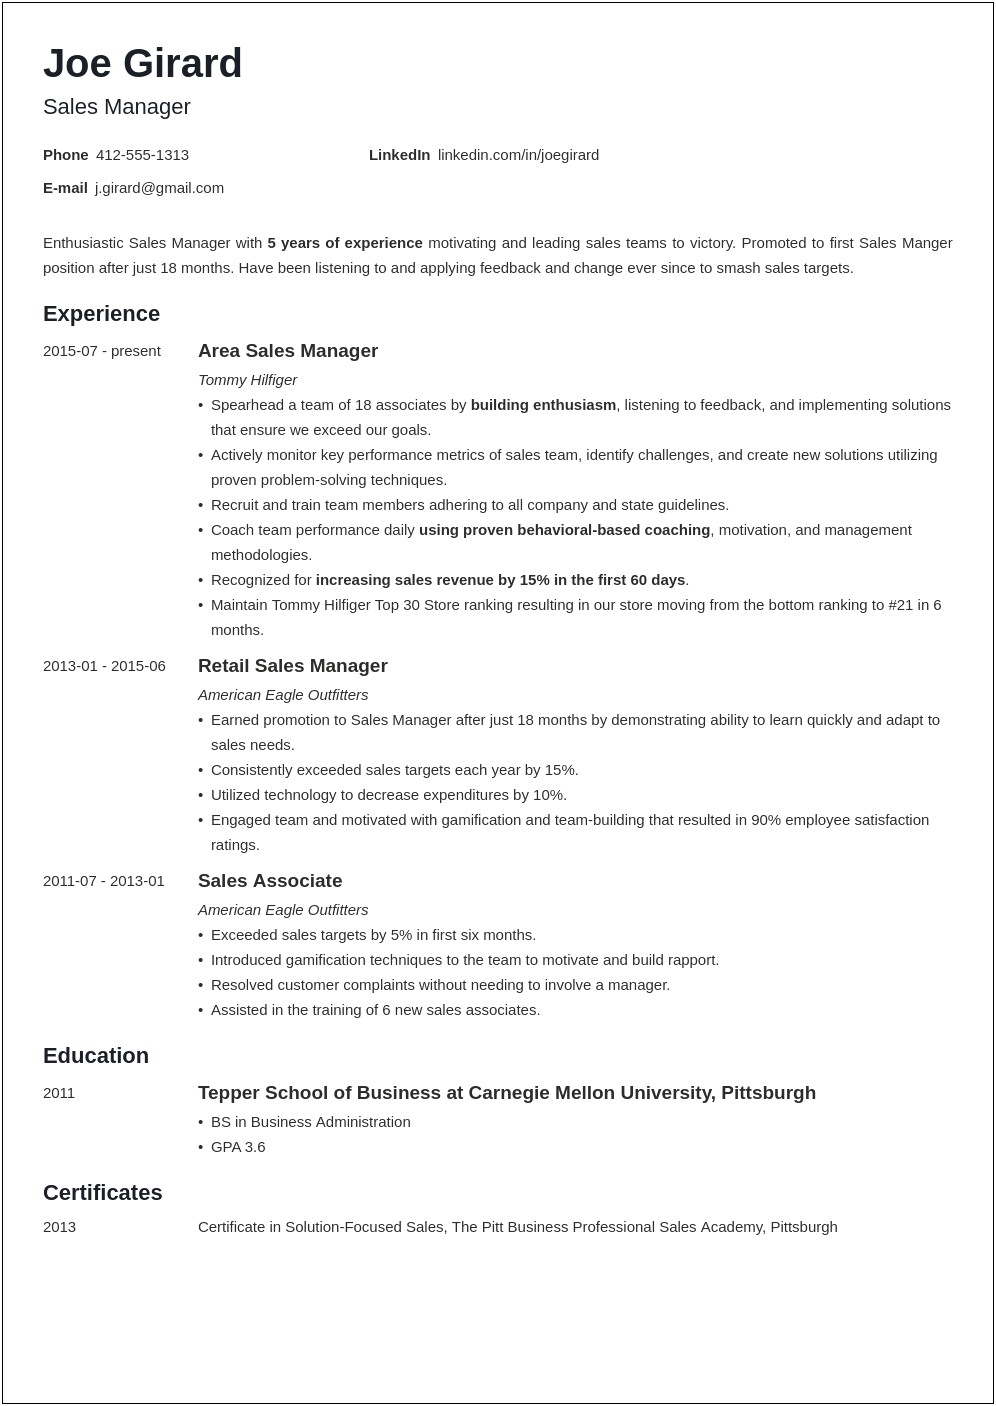 Resume Objectives For Sales Director